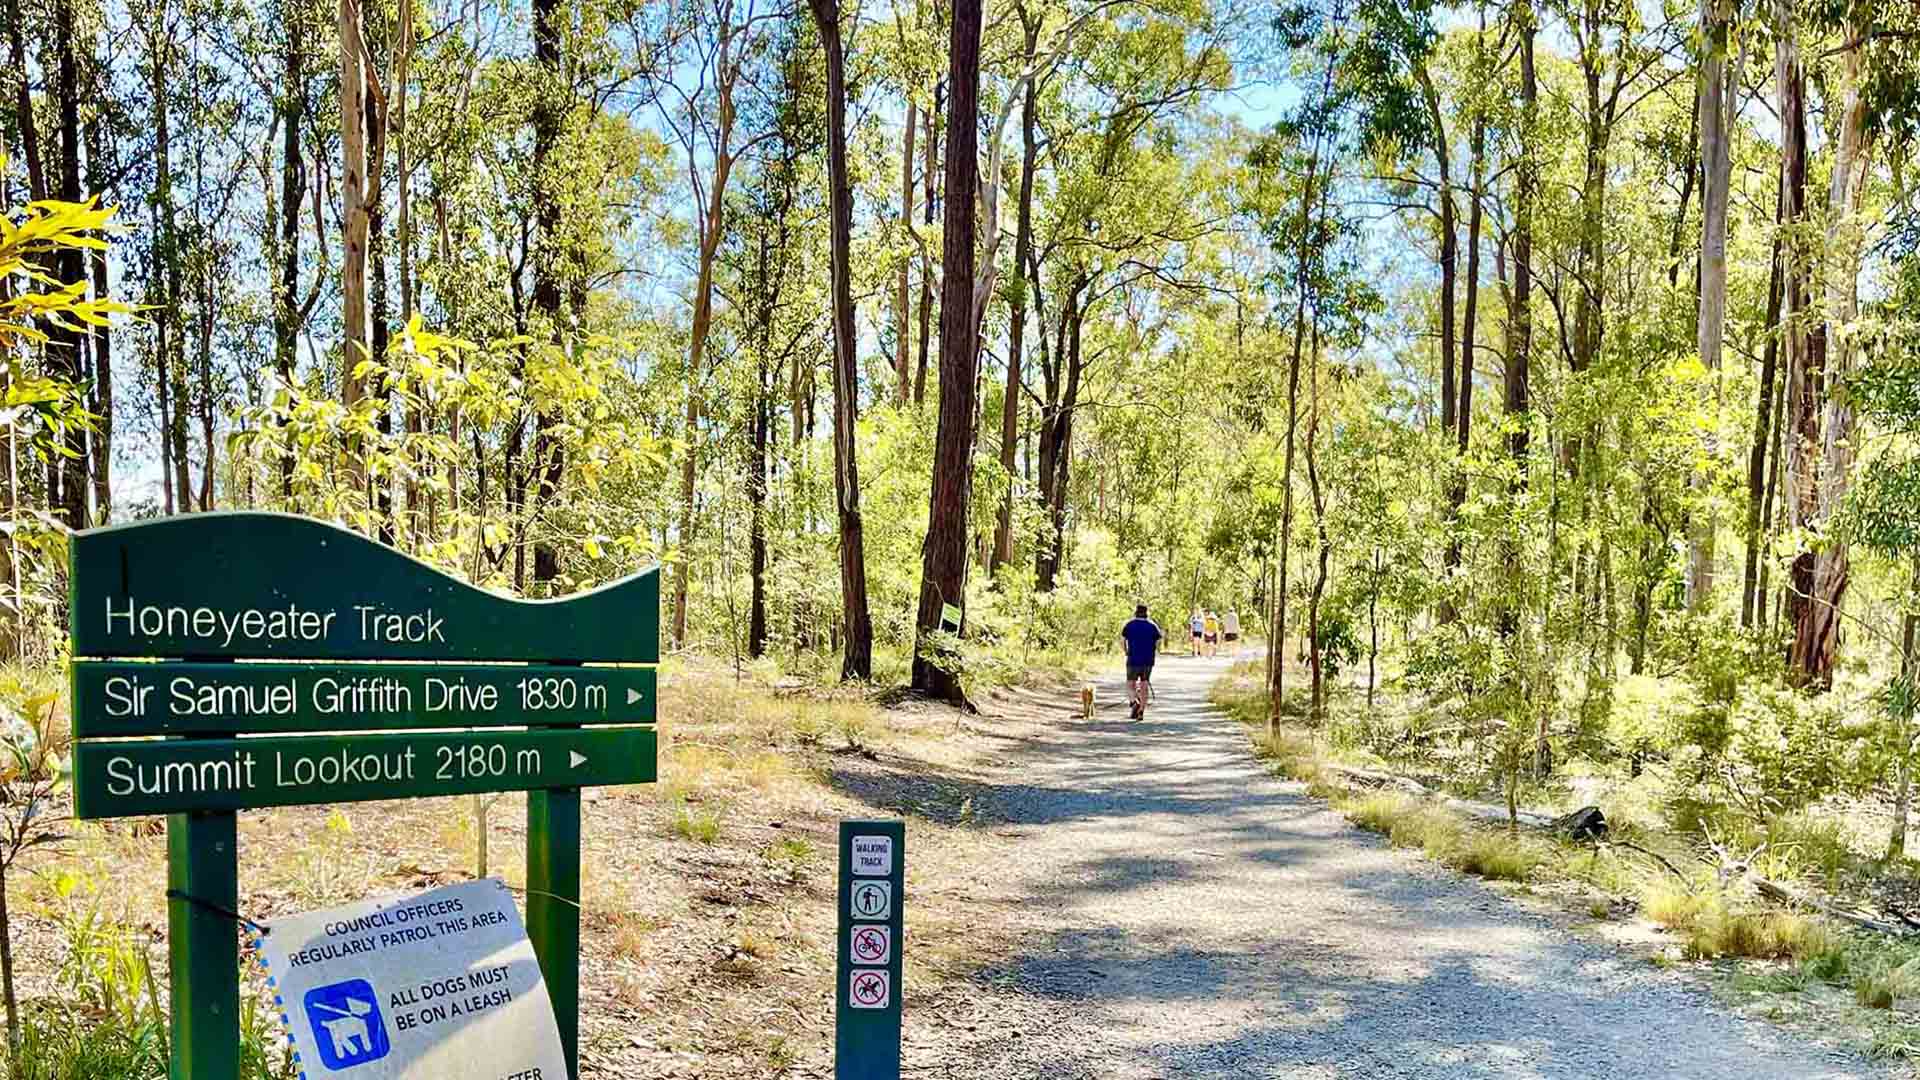 MT COOT-THA RESERVE - one of the best spots for Brisbane hiking.